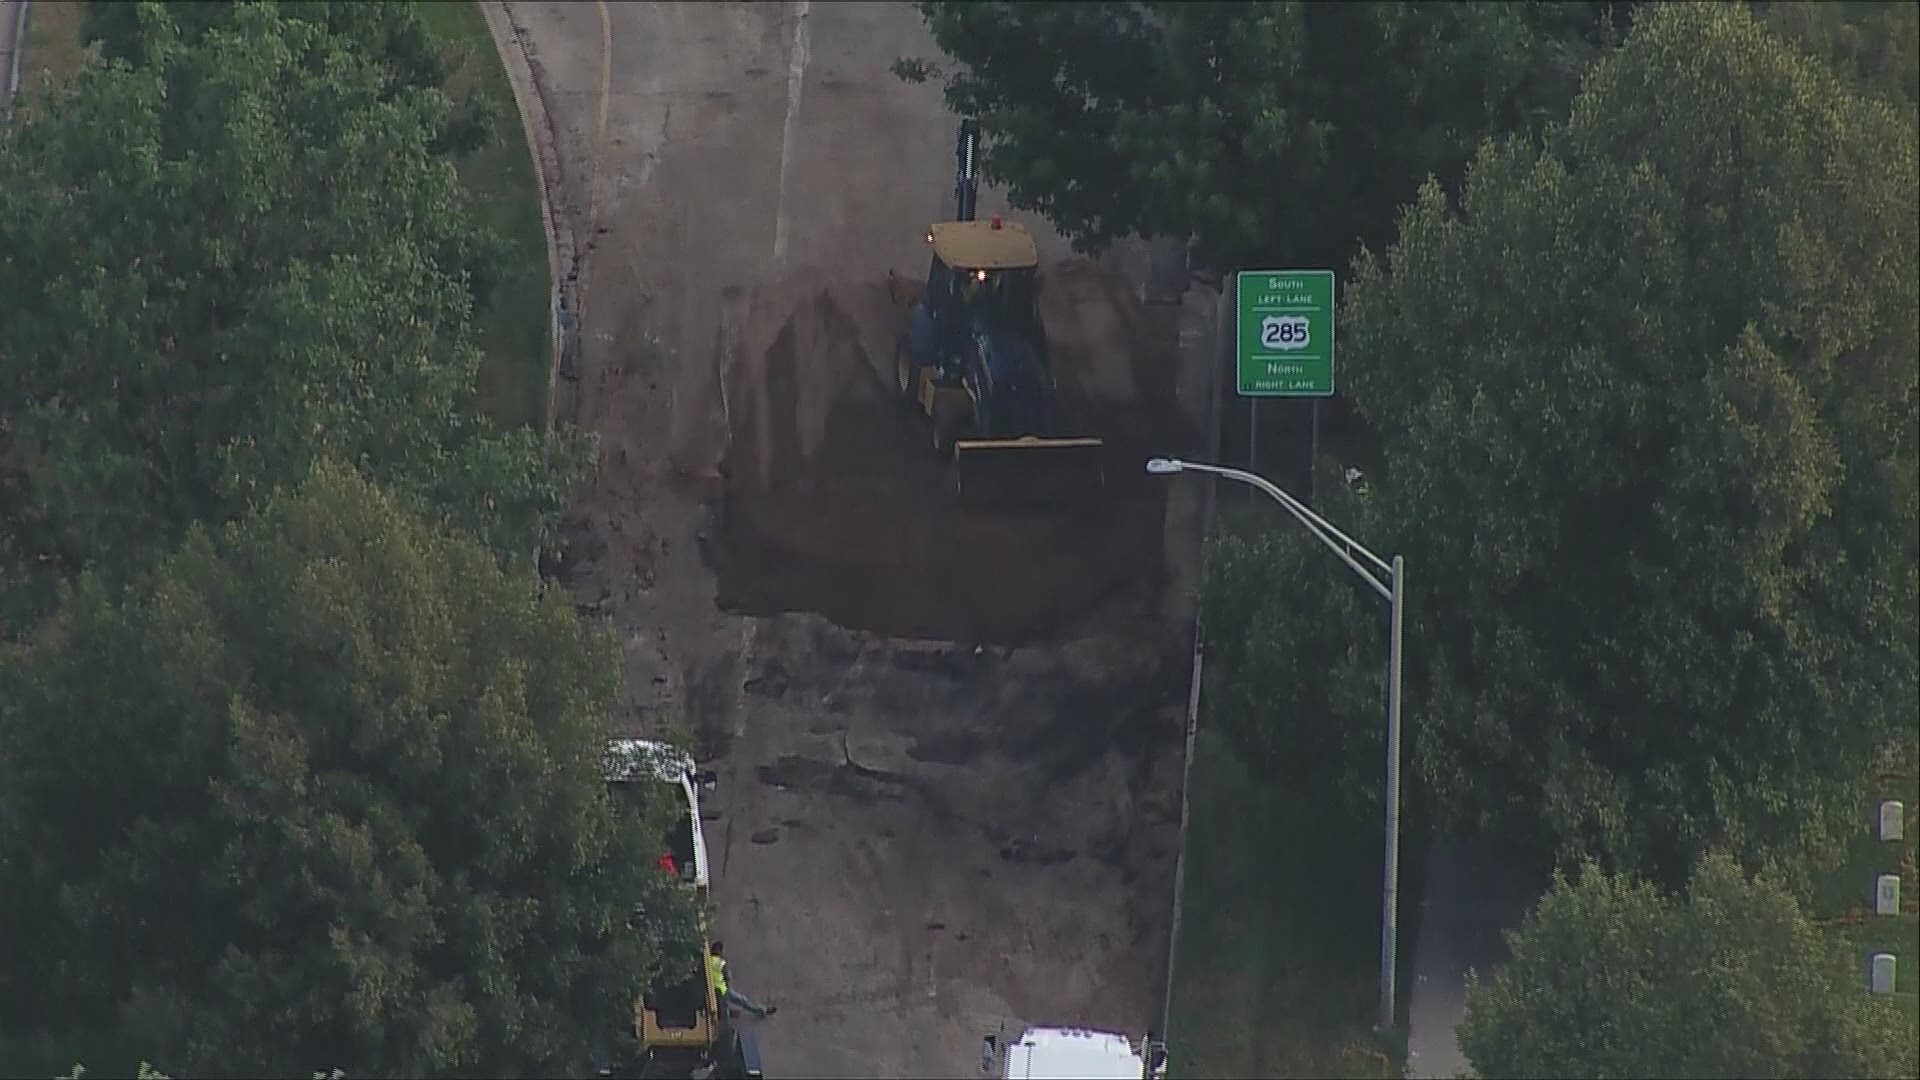 SKY9 was over the road closure on Sheridan Boulevard Friday morning.